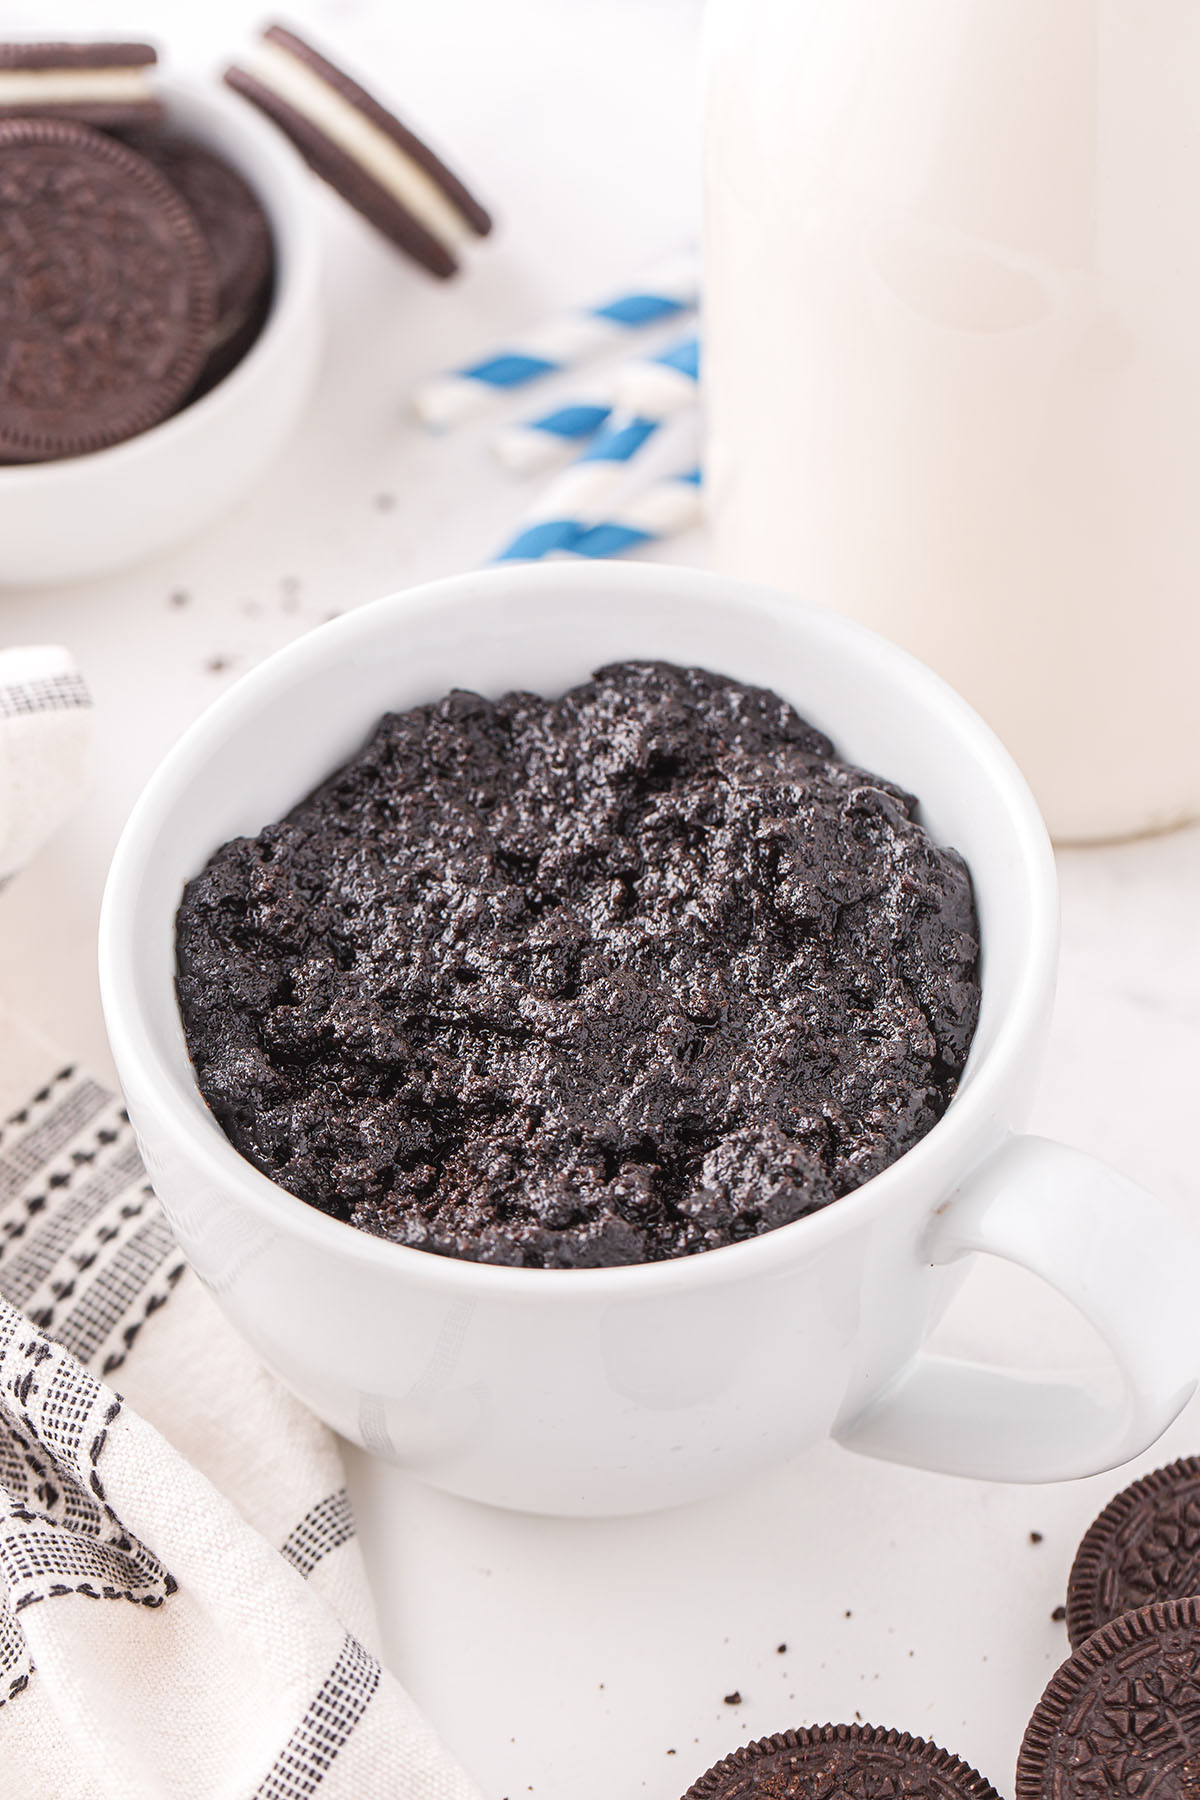 A close up of a coffee cup on a plate, with Oreo and Cake